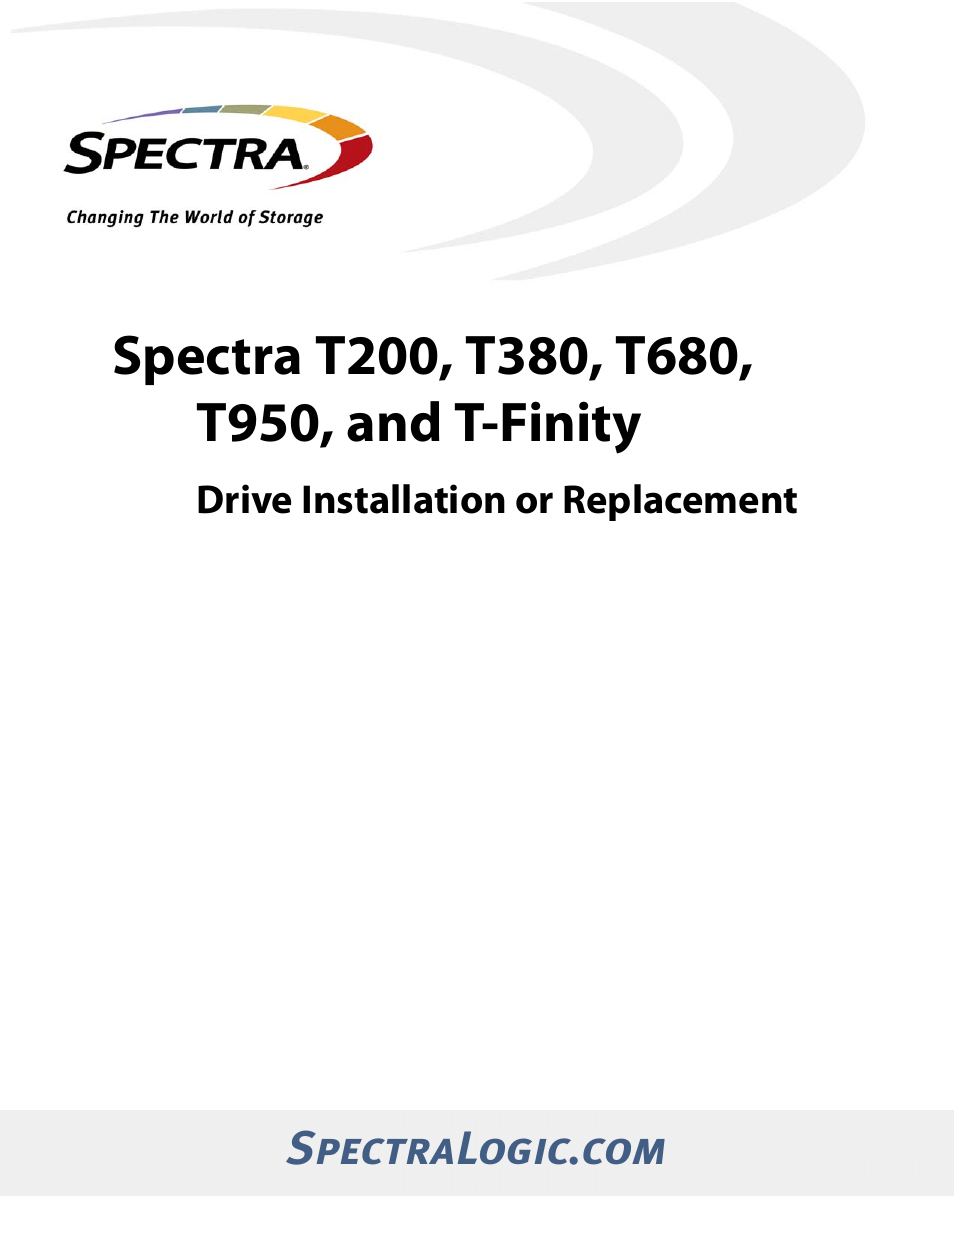 Spectra Logic T380 User Manual | 27 pages | Also for: T680, T200, T950